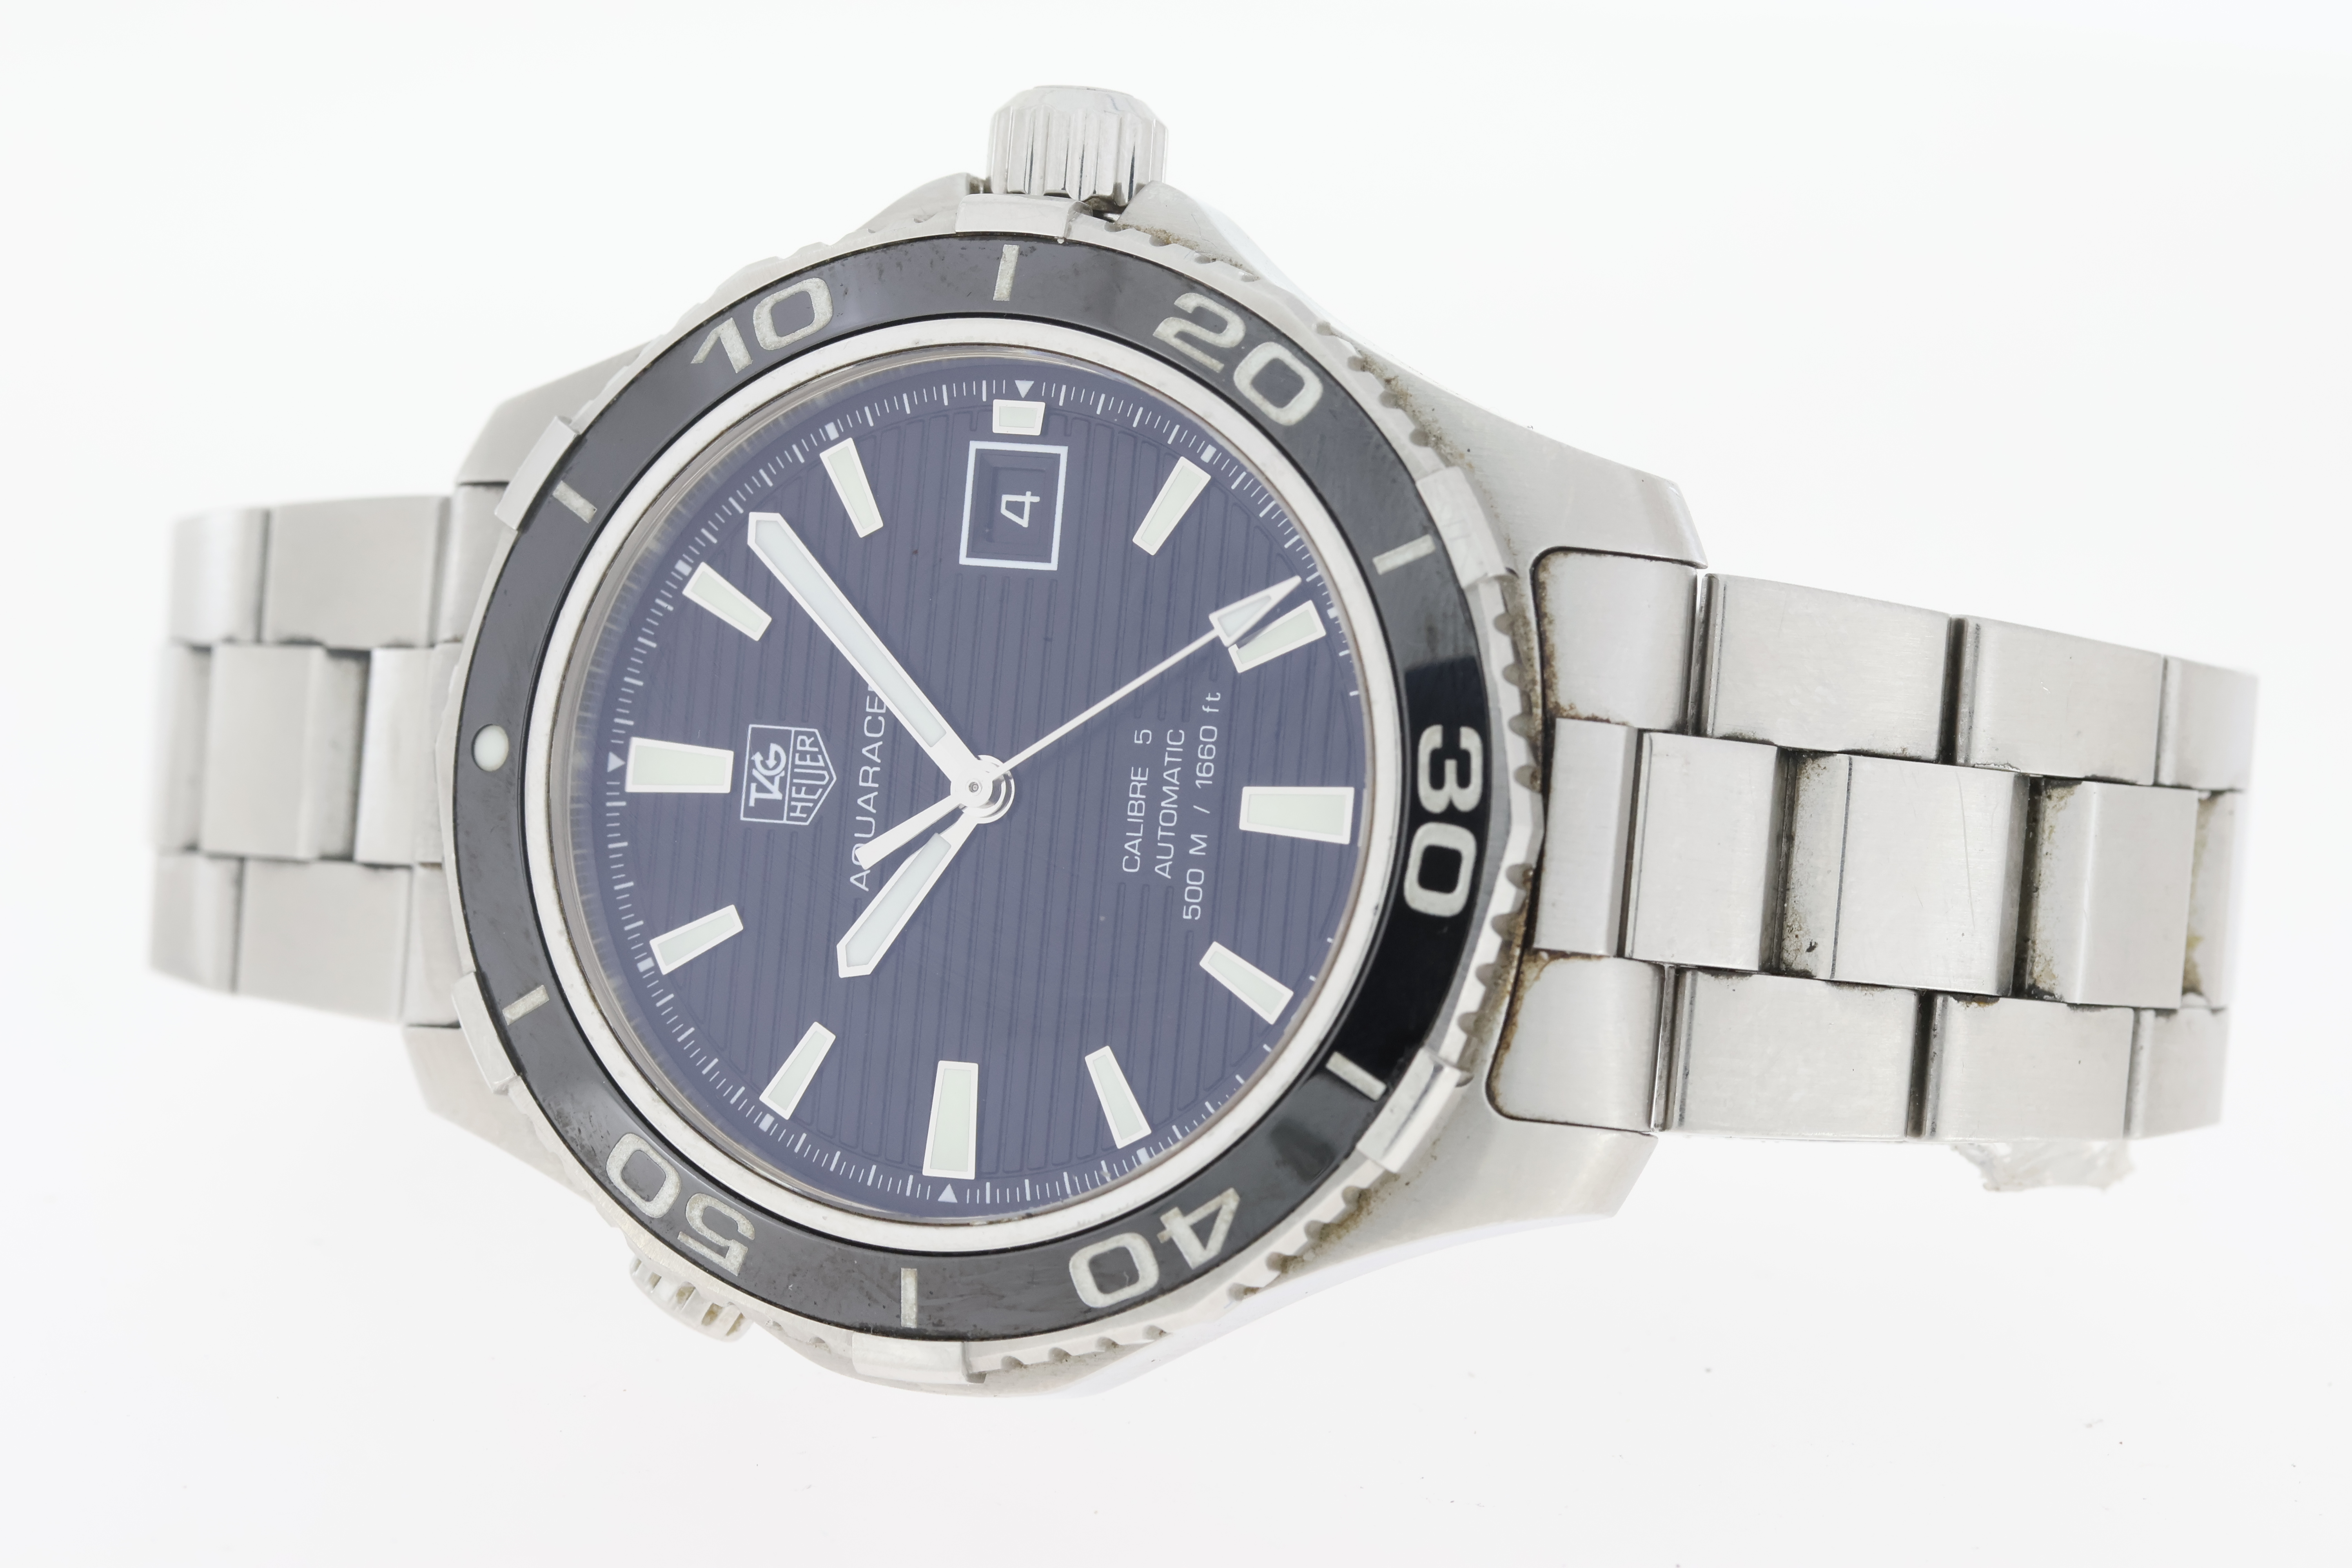 Tag Heuer Aquaracer Date Automatic Box and Papers 2013 - Image 3 of 5